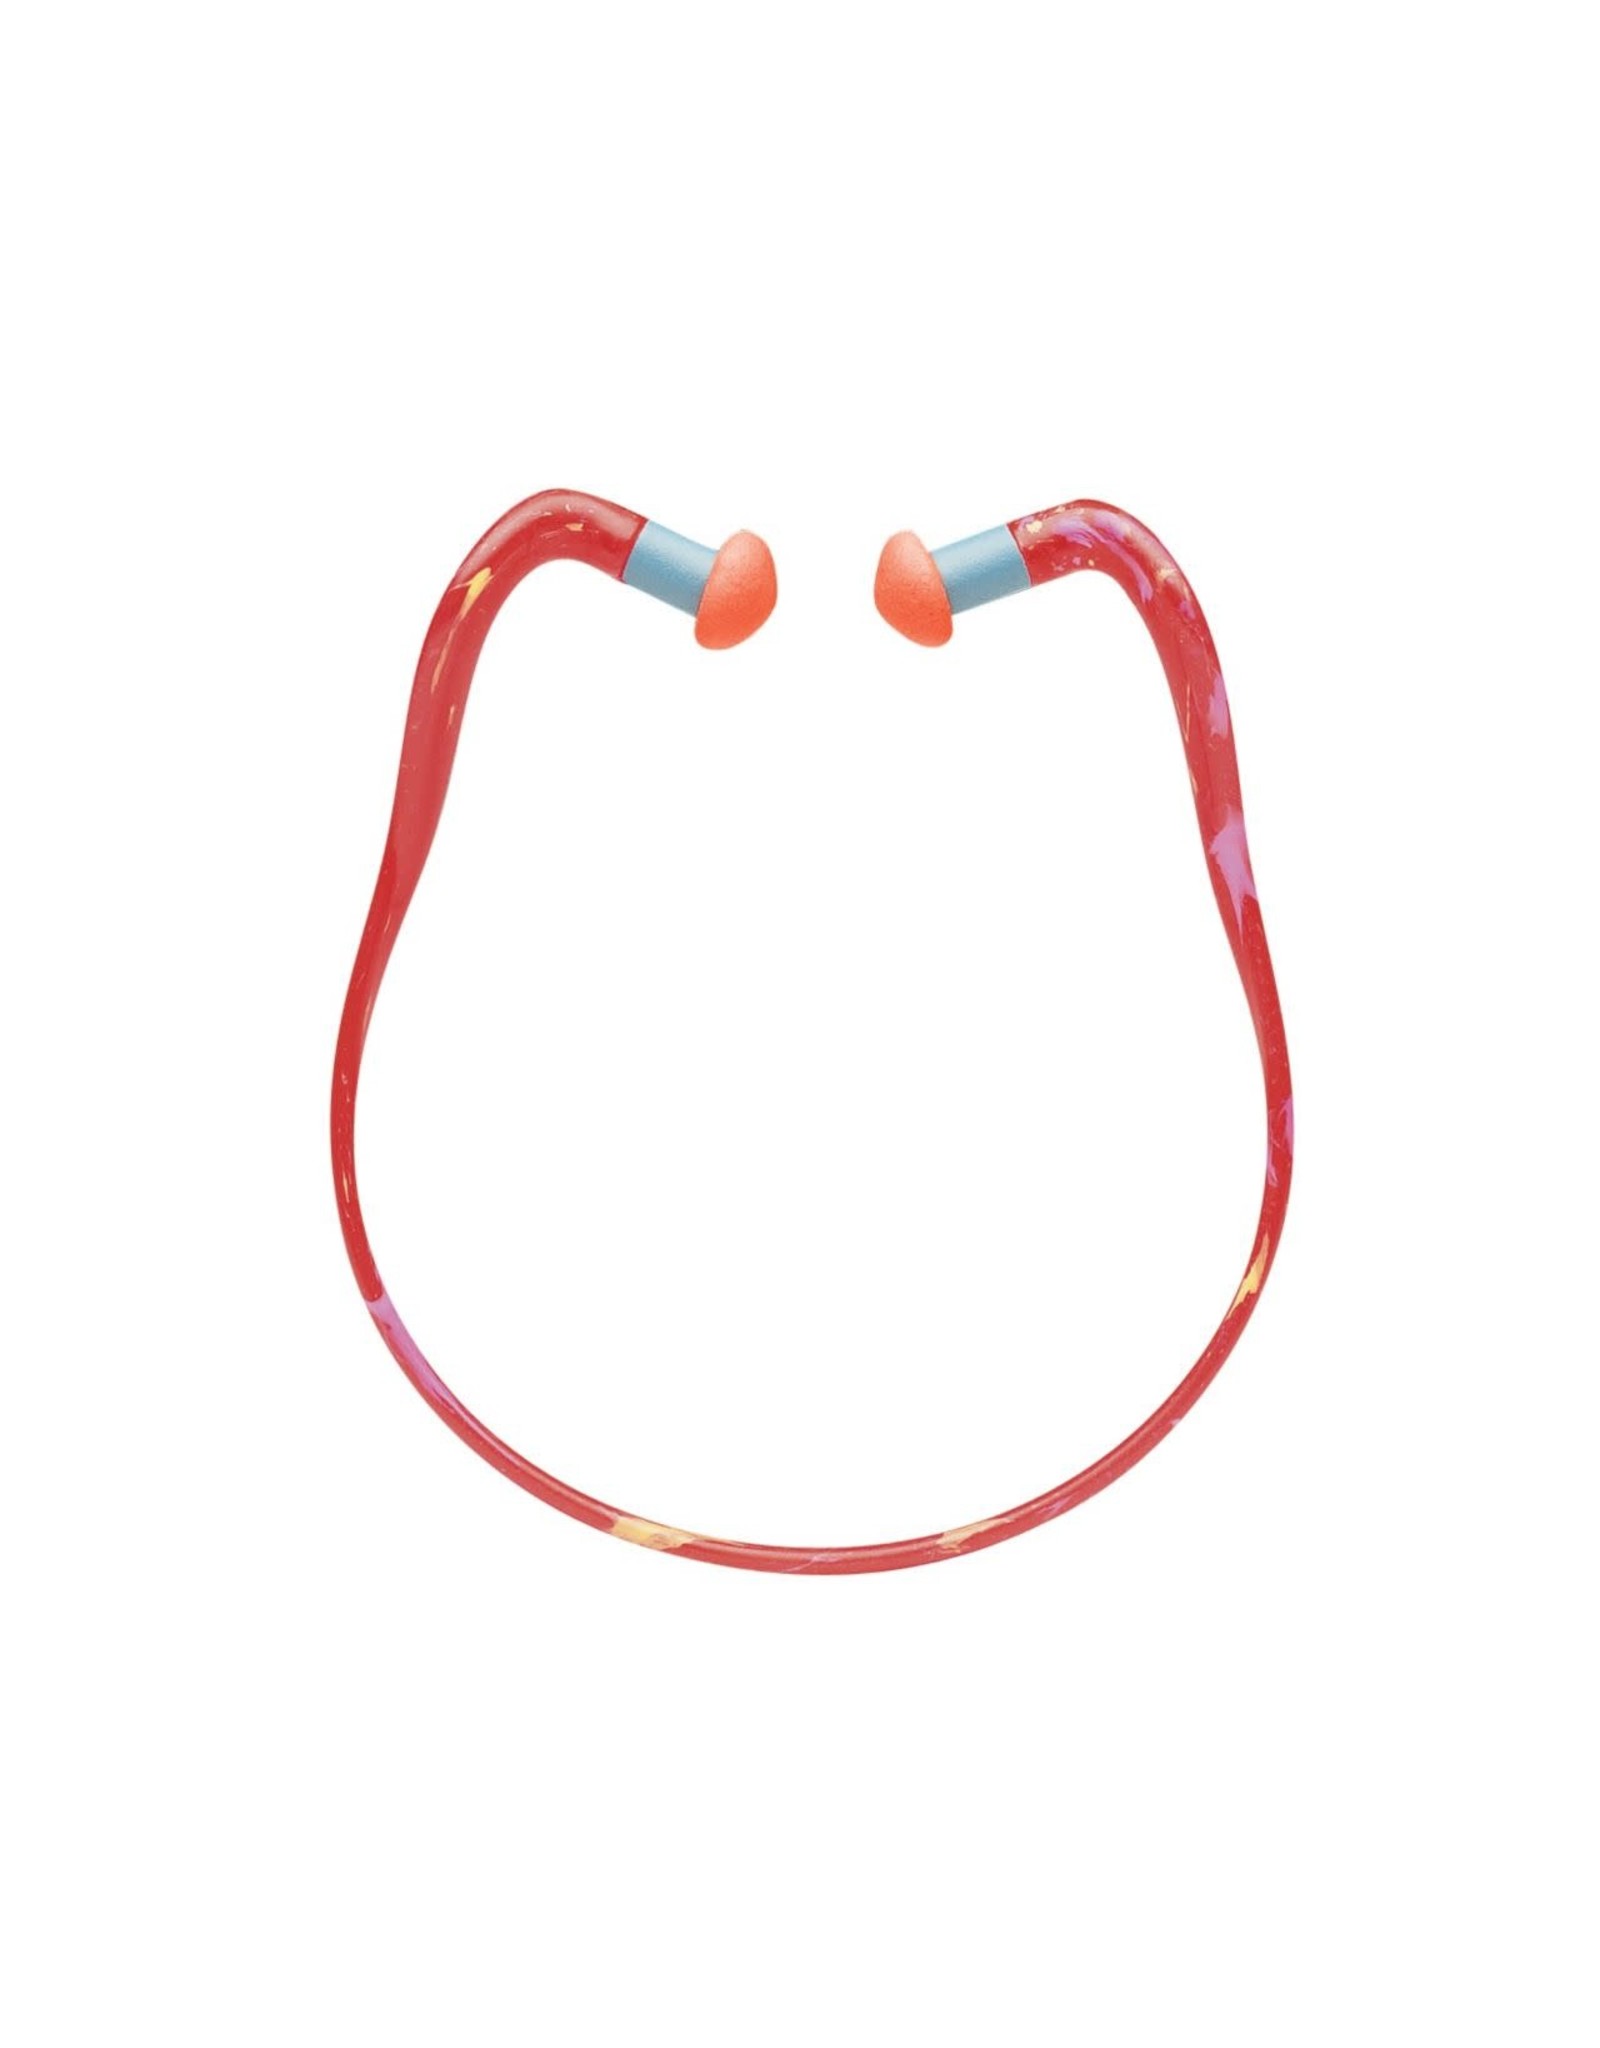 Quiet Band-Banded Multi-Use Earplugs